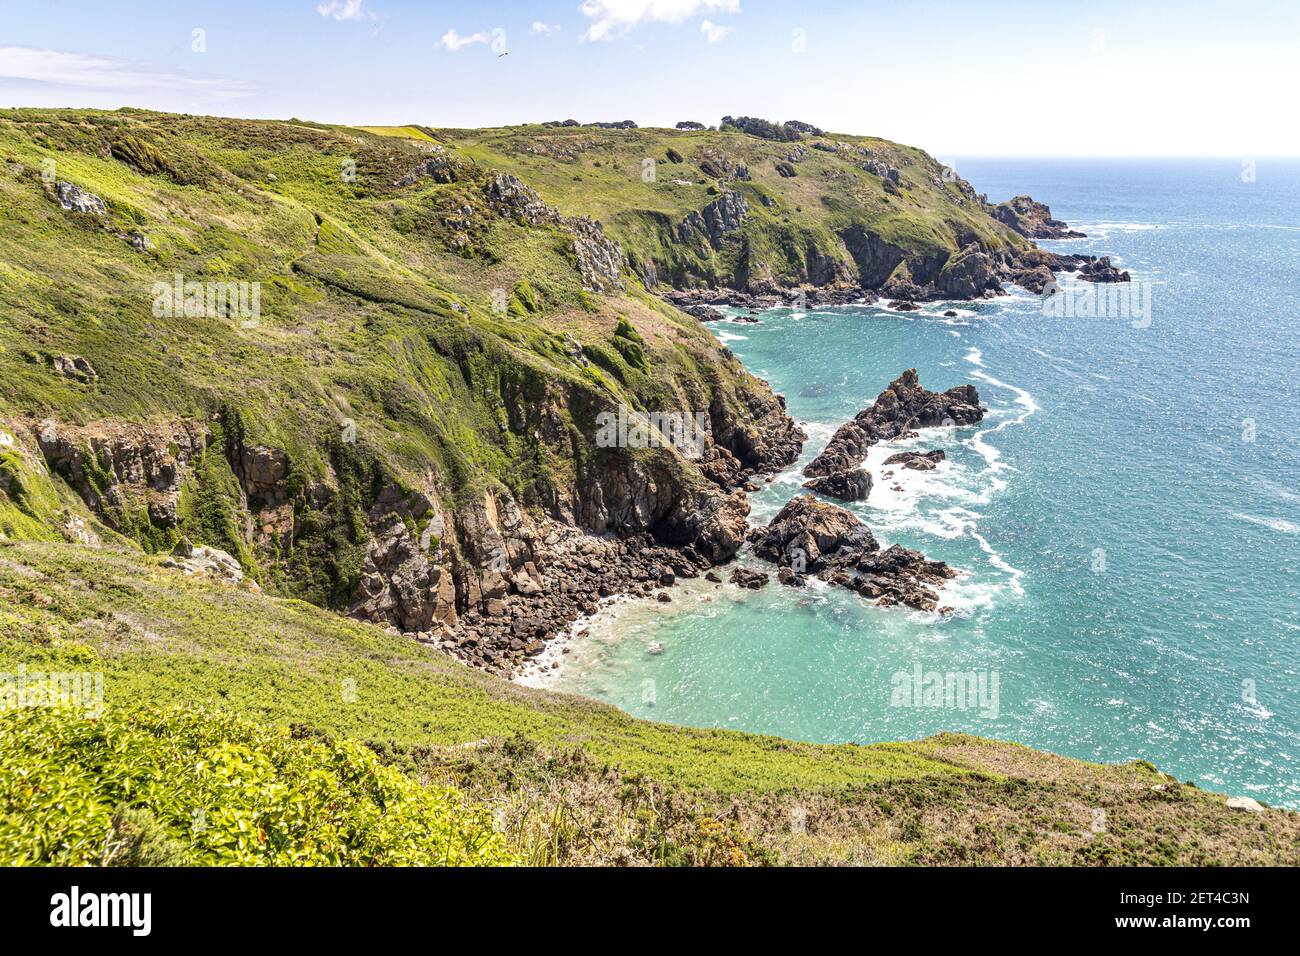 The beautiful rugged south coast of Guernsey, Channel Islands UK - Looking towards Icart Point from near Petit Bot Stock Photo